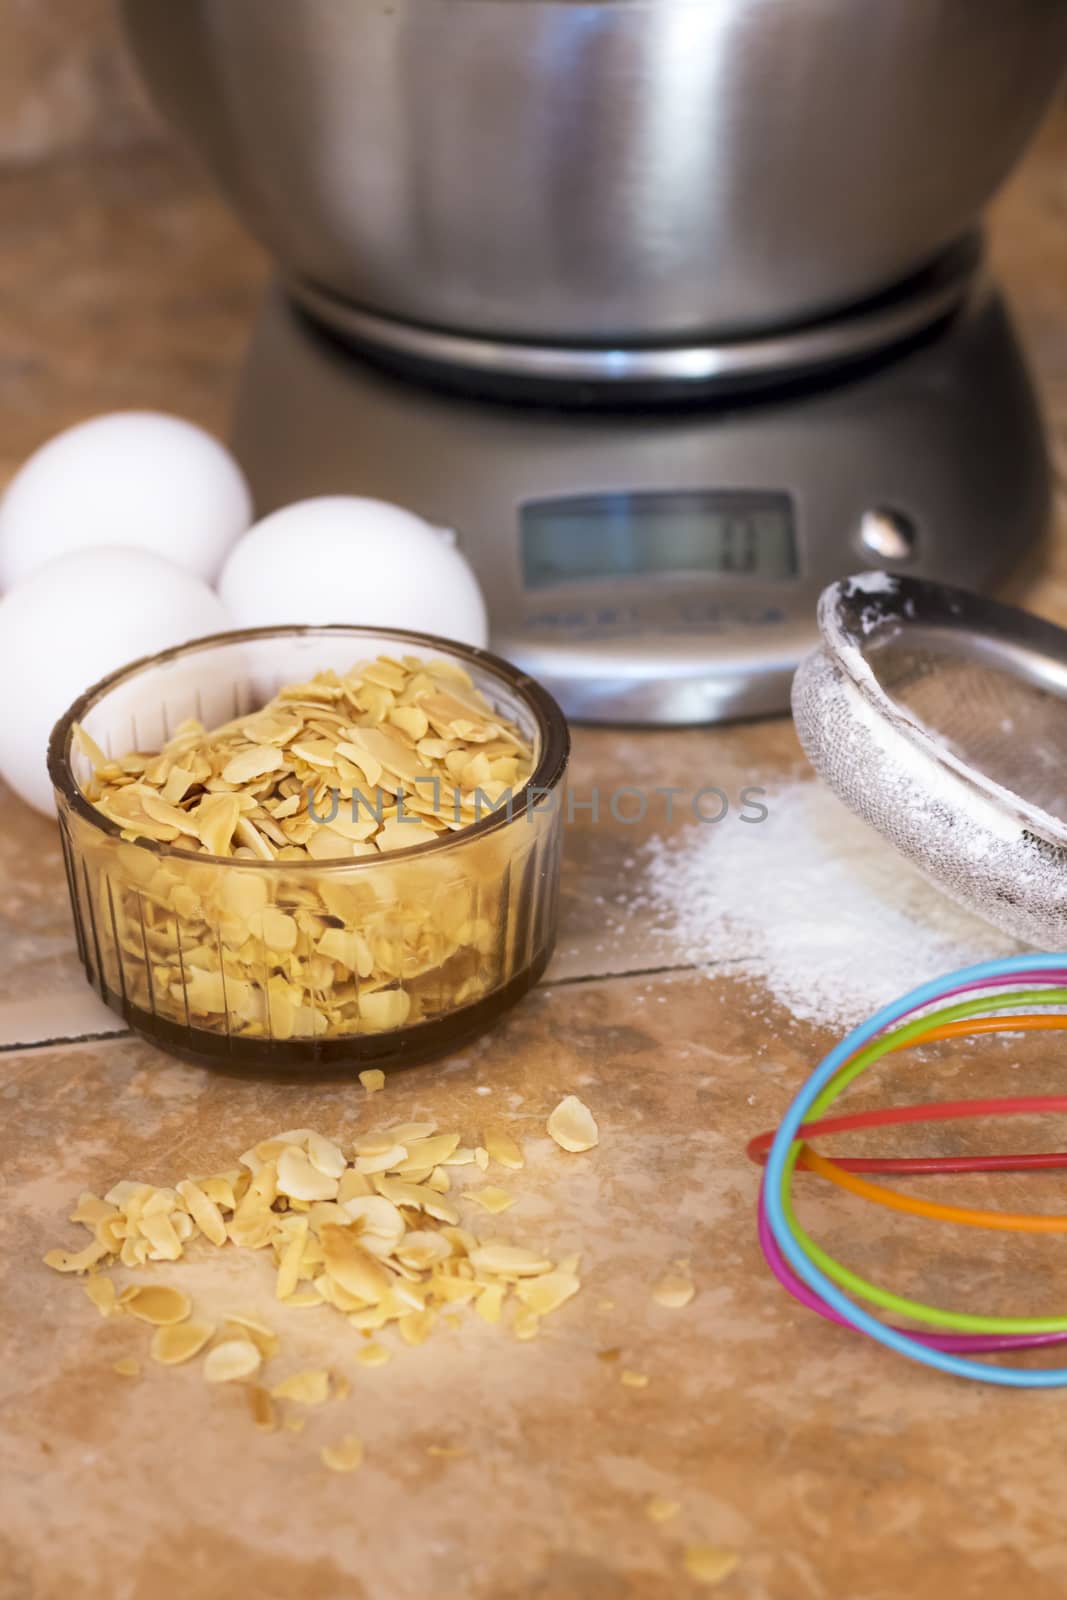 three eggs,sliced almonds and gray metal scale,sieve flour and colorful whip